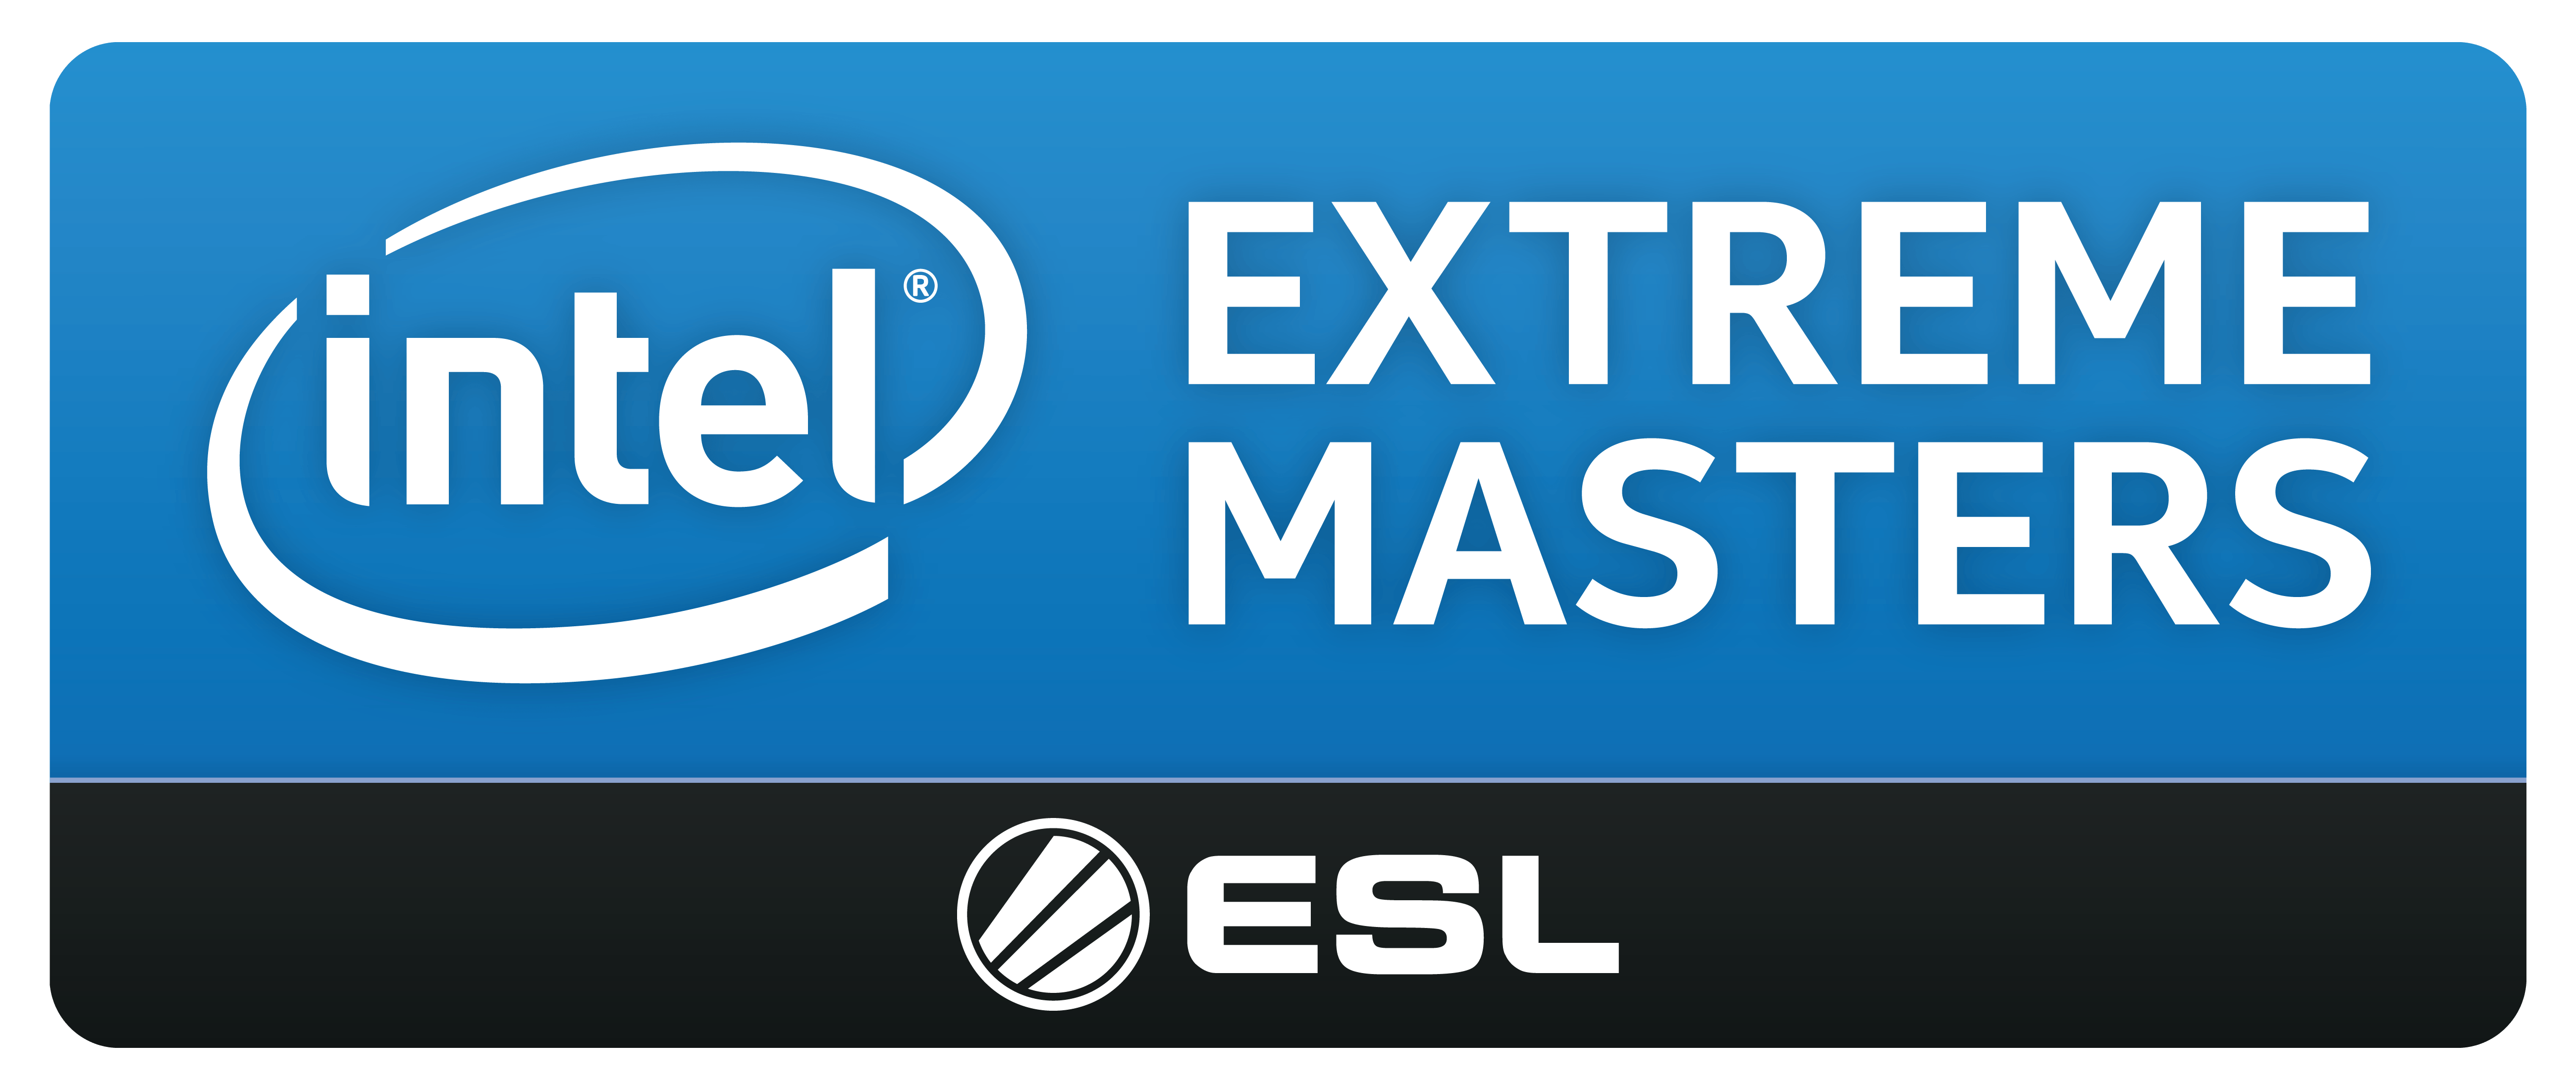 Watch the Intel Extreme Masters CS:GO and PUBG tournaments right here